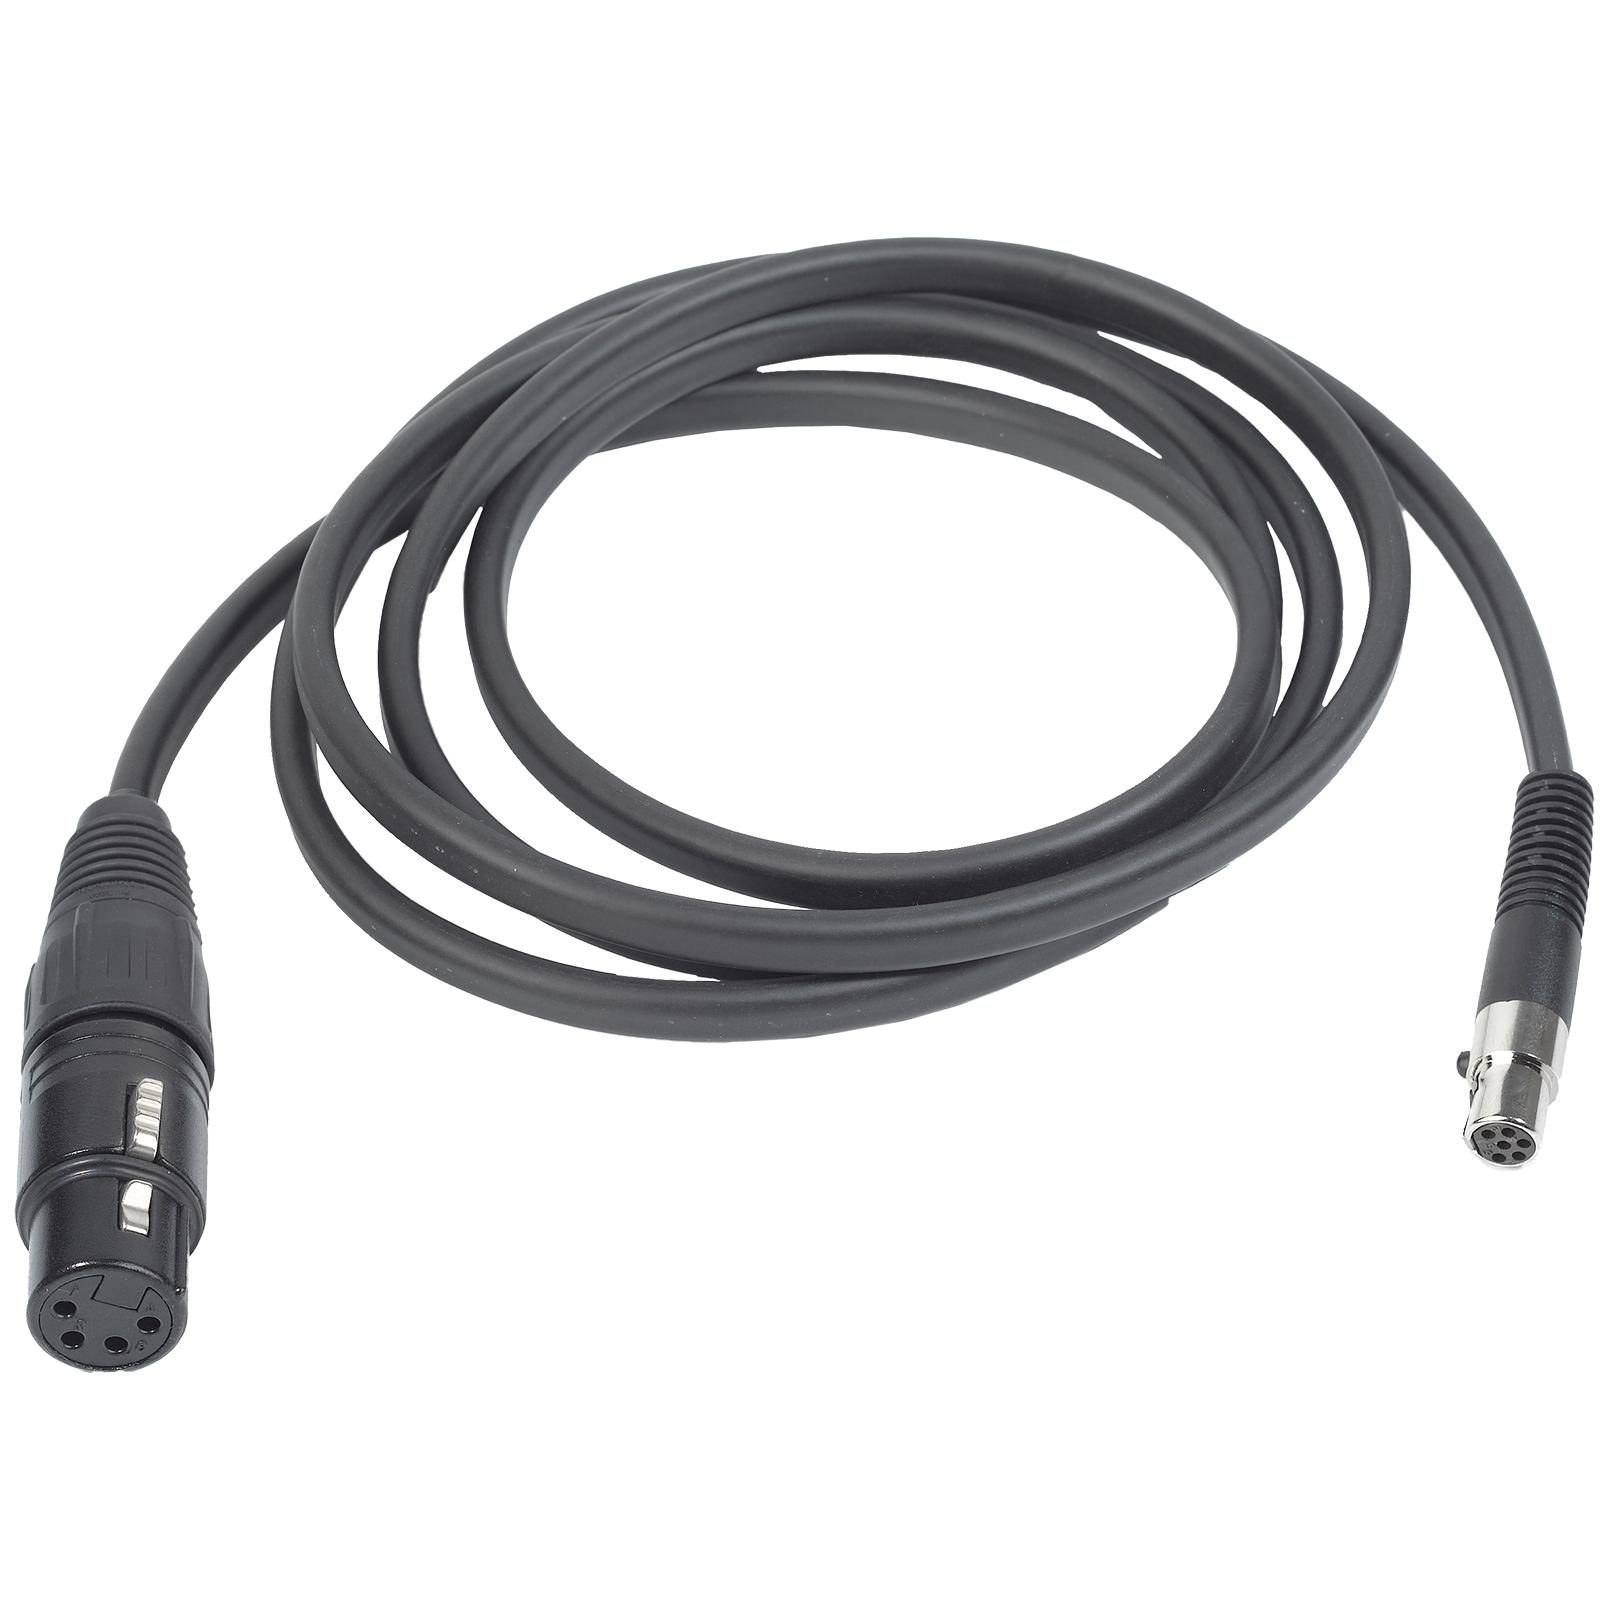 MK HS XLR 4D (B-Stock) - Black - Detachable cable for AKG HSD headsets with 4pin XLR connector (female) - Hero